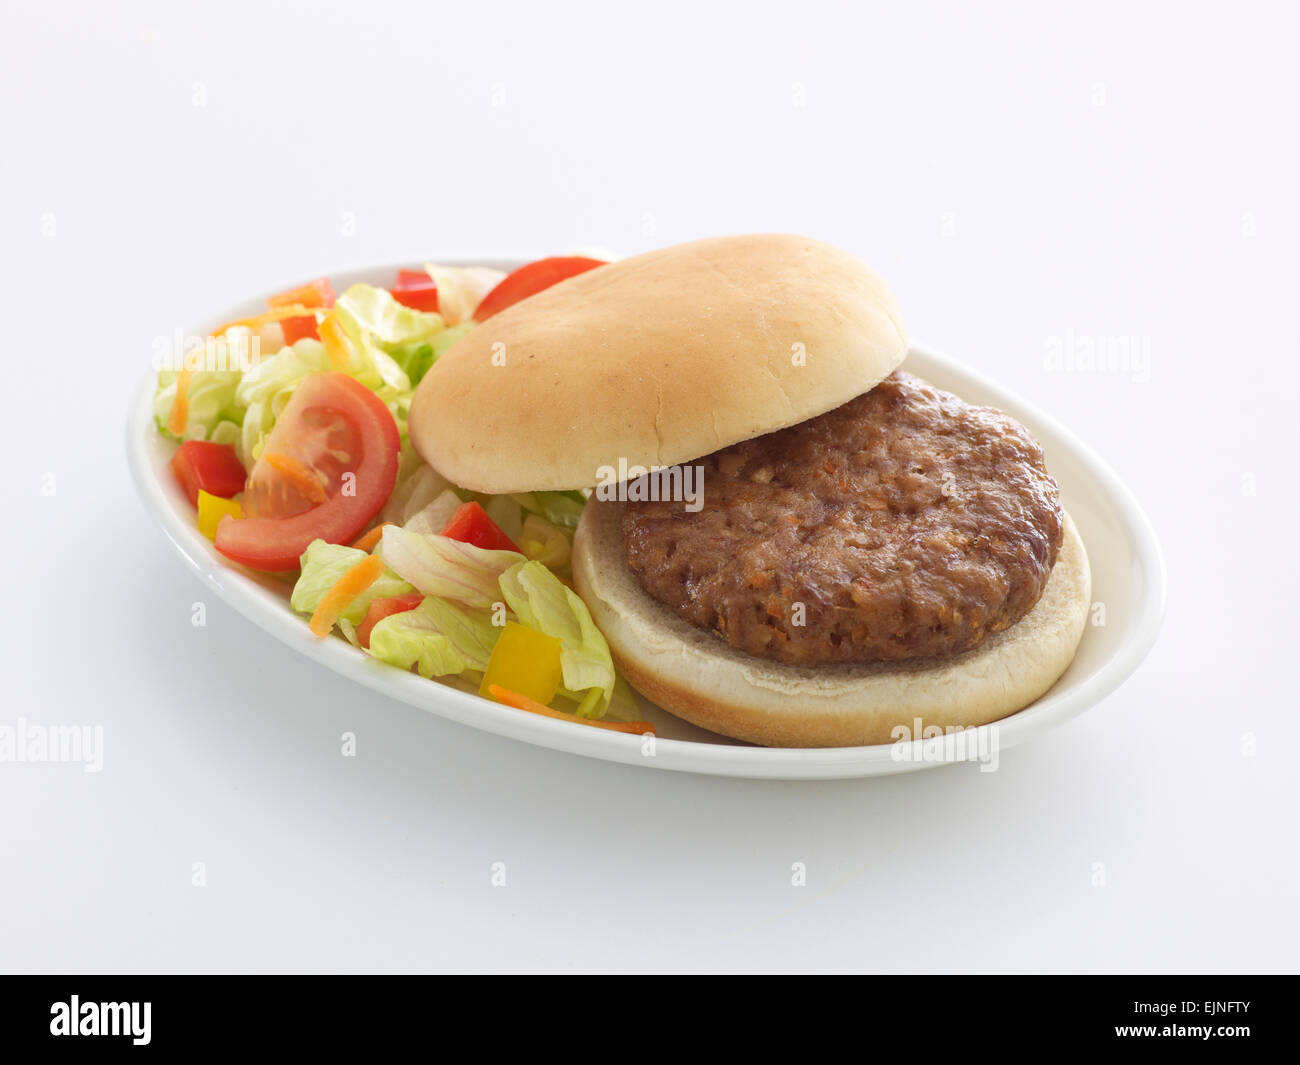 https://c8.alamy.com/comp/EJNFTY/plain-burger-and-bun-with-salad-EJNFTY.jpg